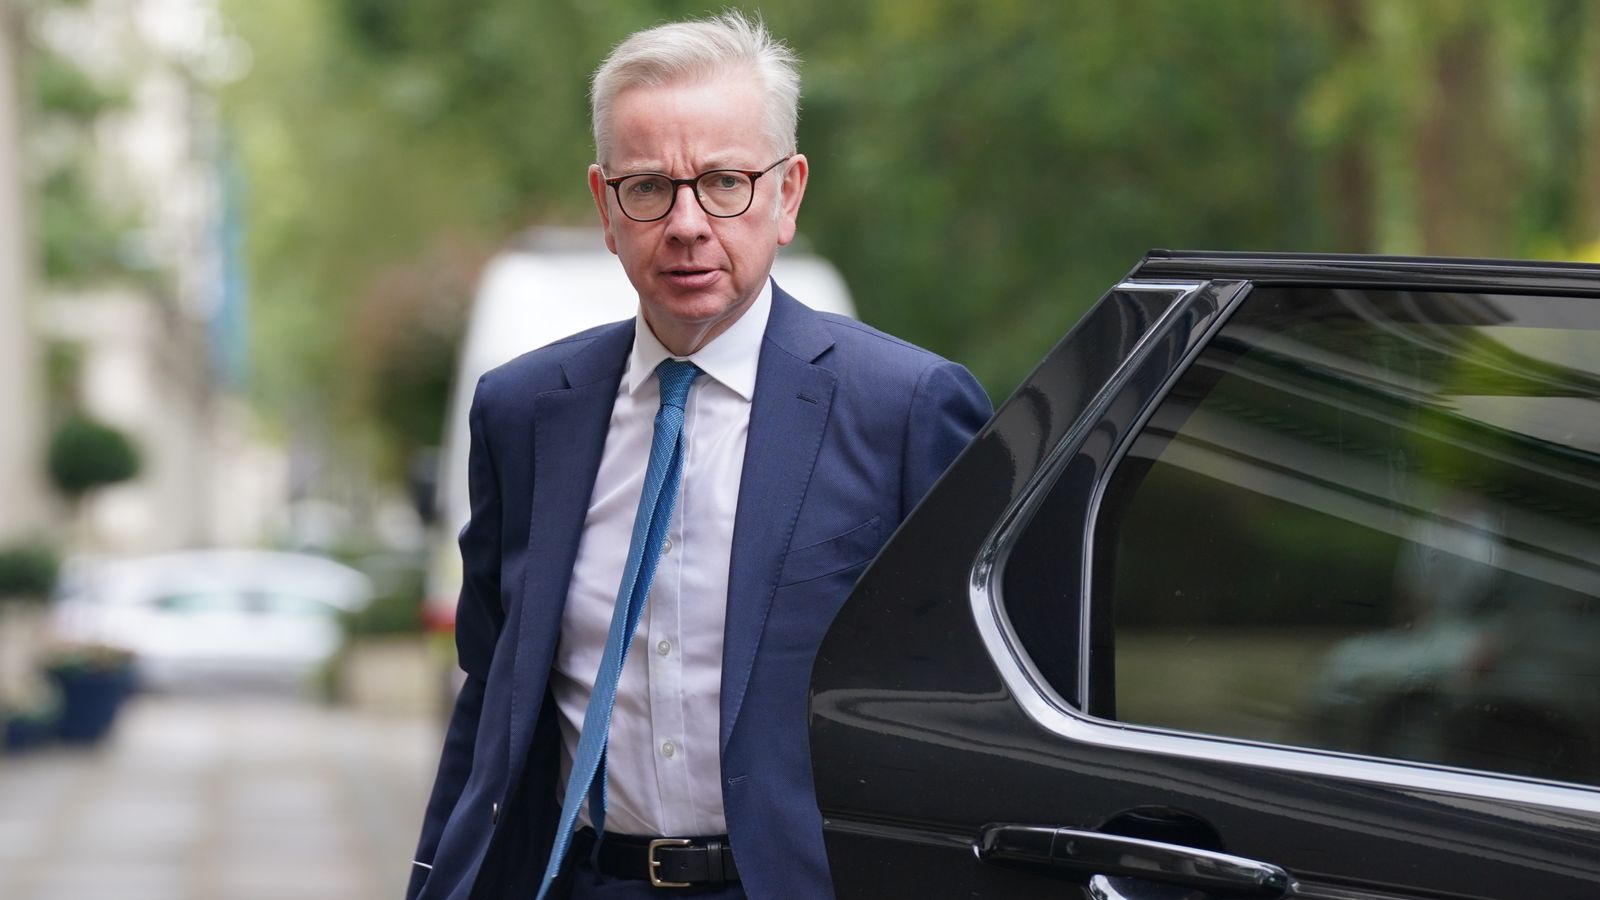 COVID-19 inquiry: Brexit preparation 'helped' COVID response, Michael Gove argues